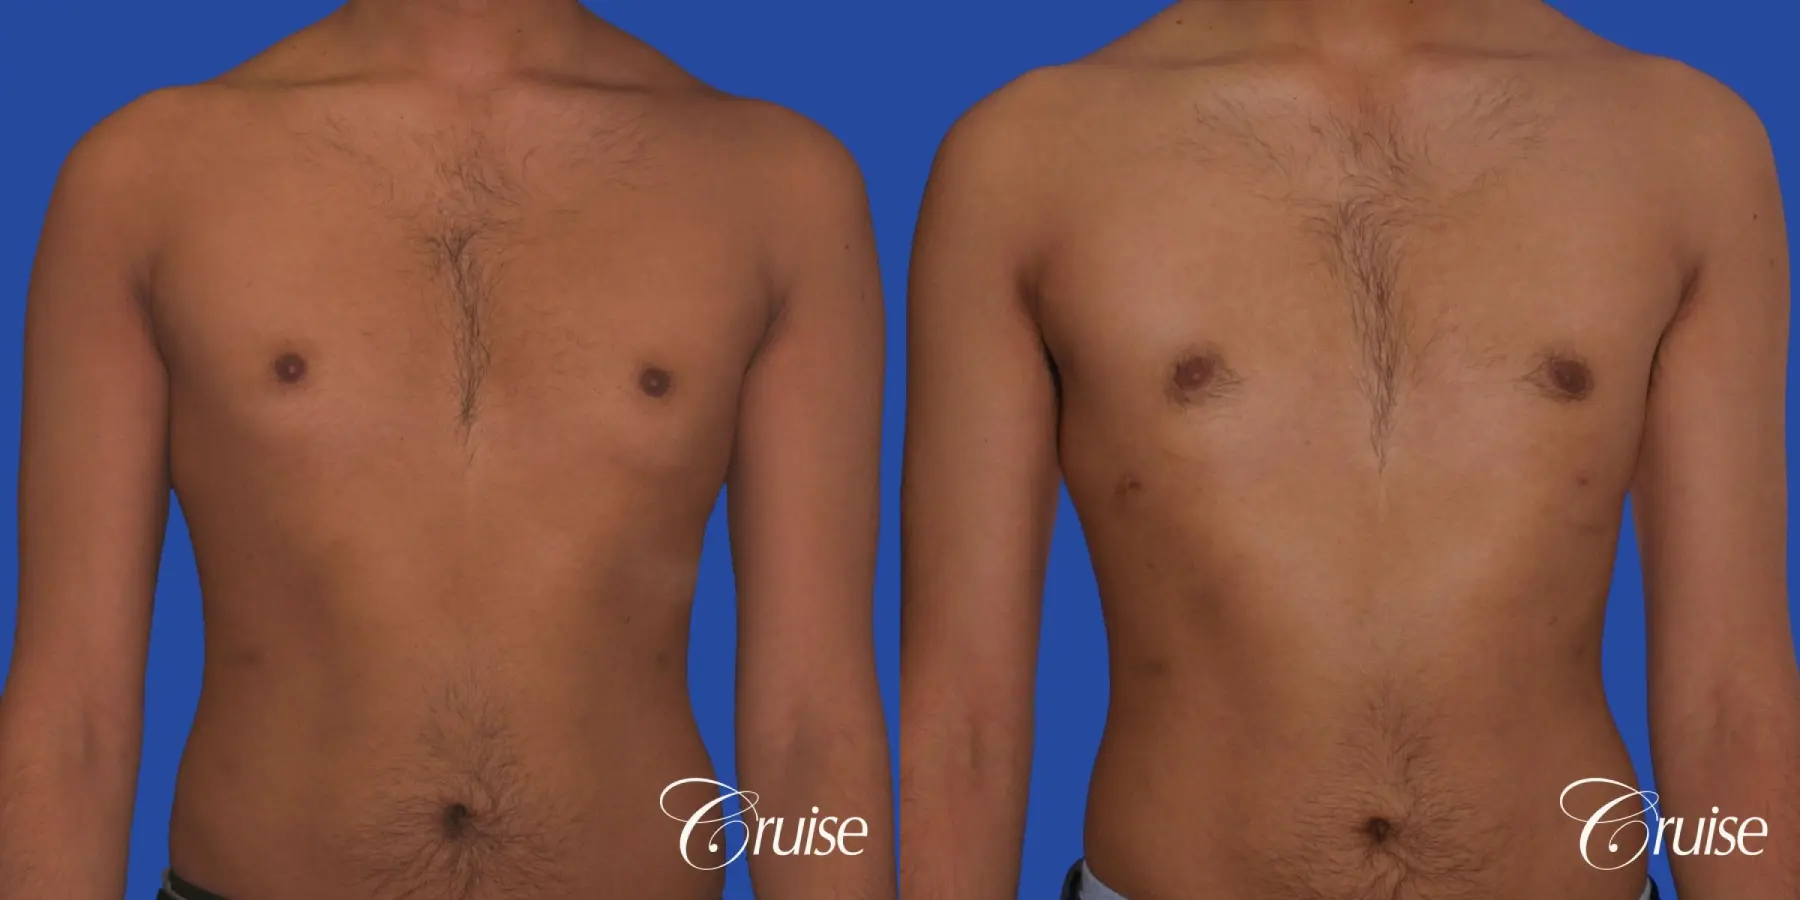 best before and after results for gynecomastia surgery - Before and After 1